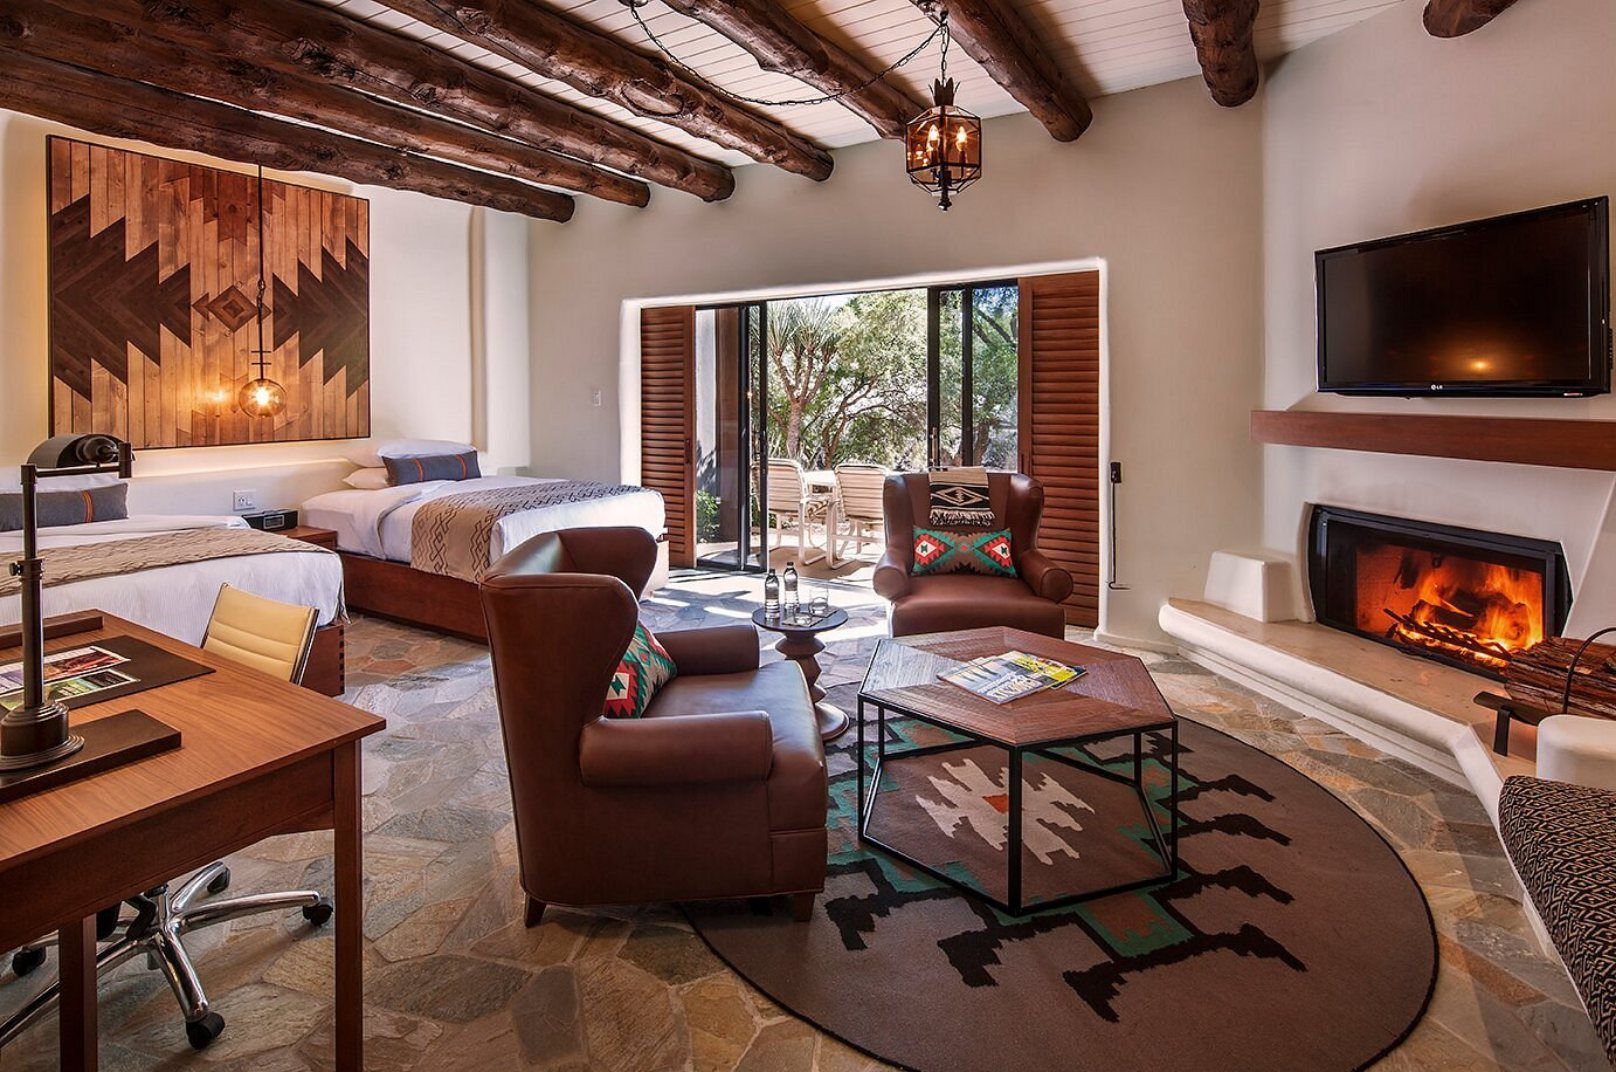 The best hotels in Scottsdale and Phoenix